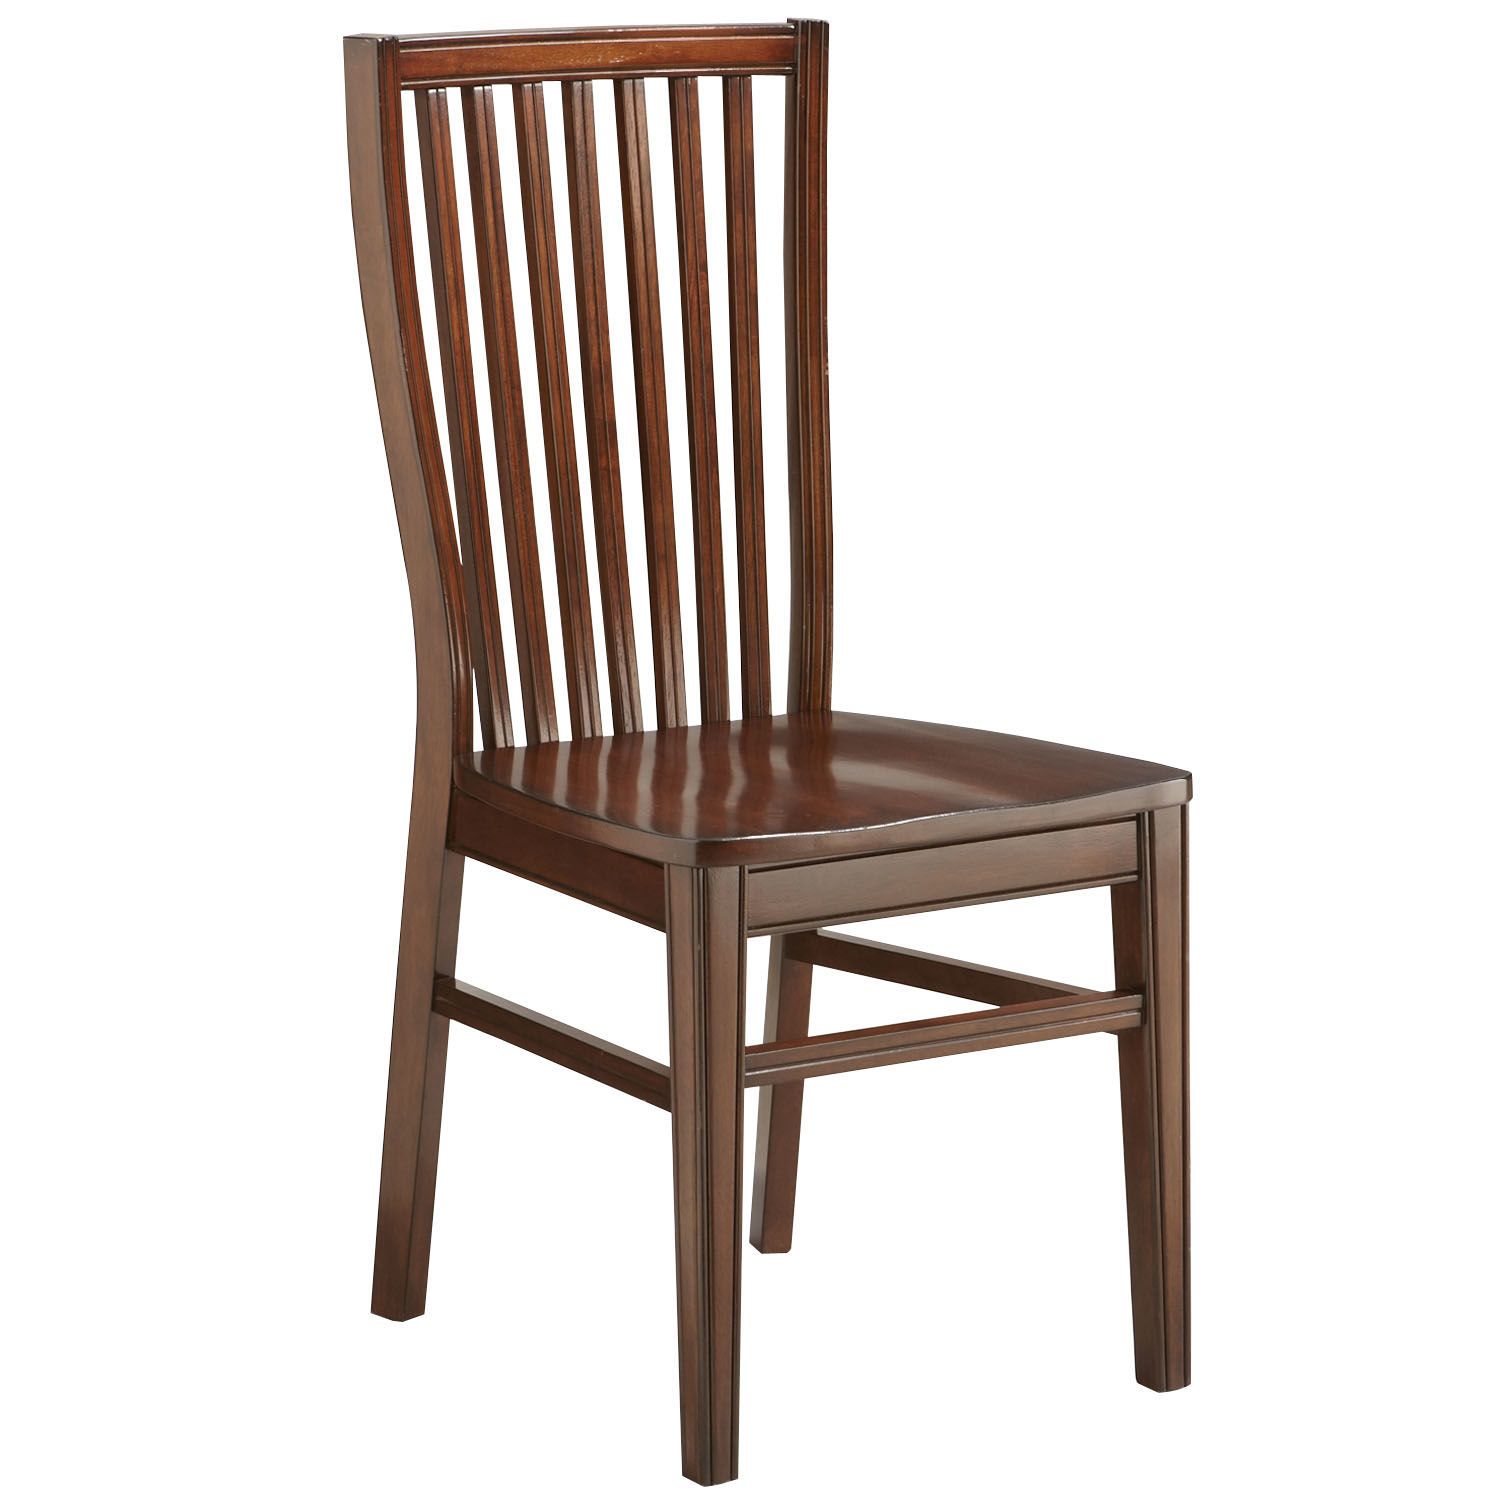 Ronan Tobacco Brown Dining Chair | Pier 1 Imports